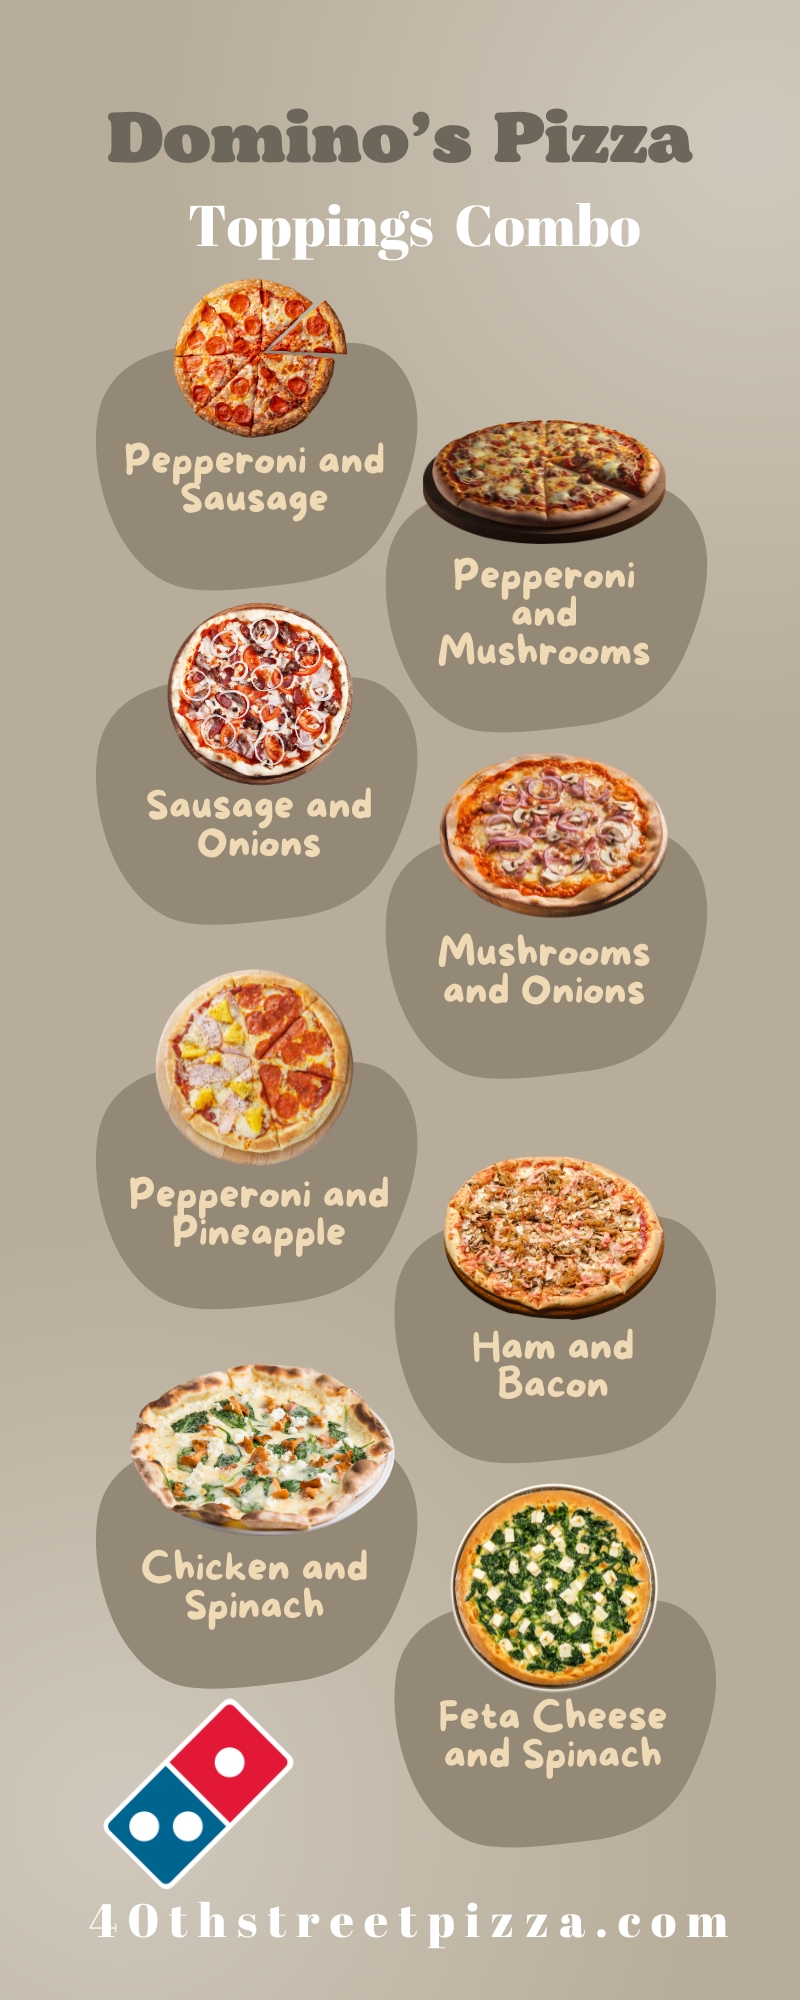 Domino's Pizza Toppings Combos